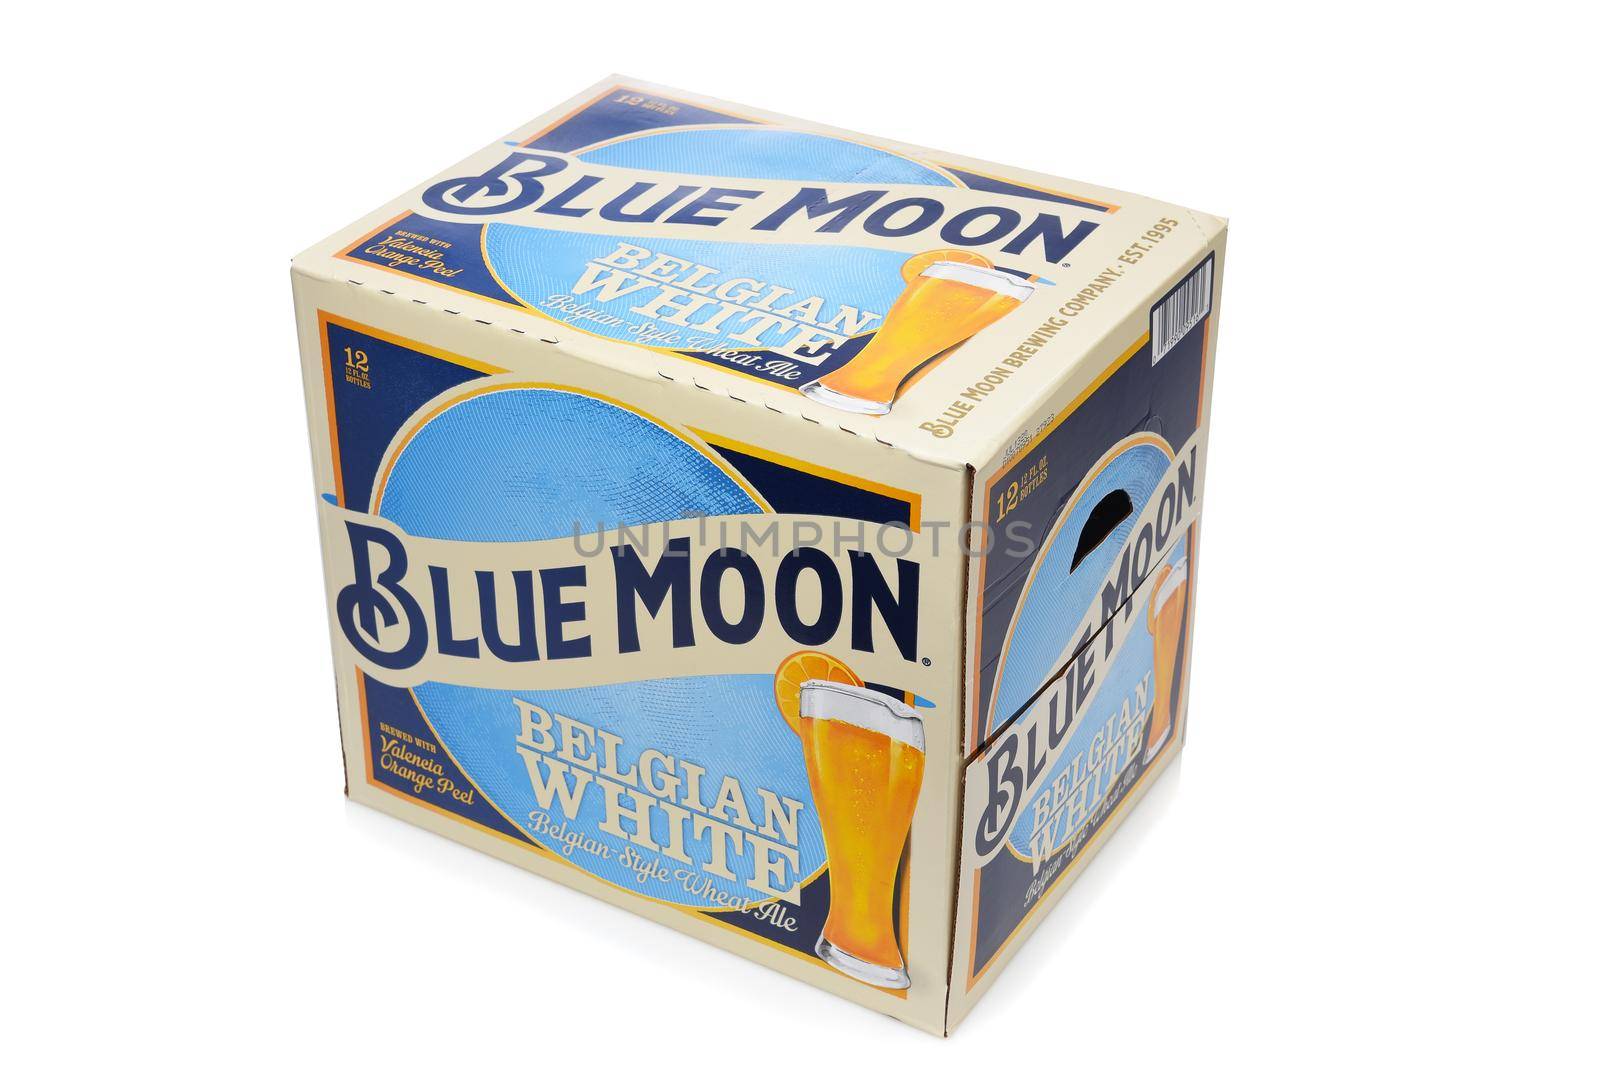 IRVINE, CALIFORNIA - 10 MAR 2020: A 12 pack of Blue Moon Belgian White Ale.  by sCukrov